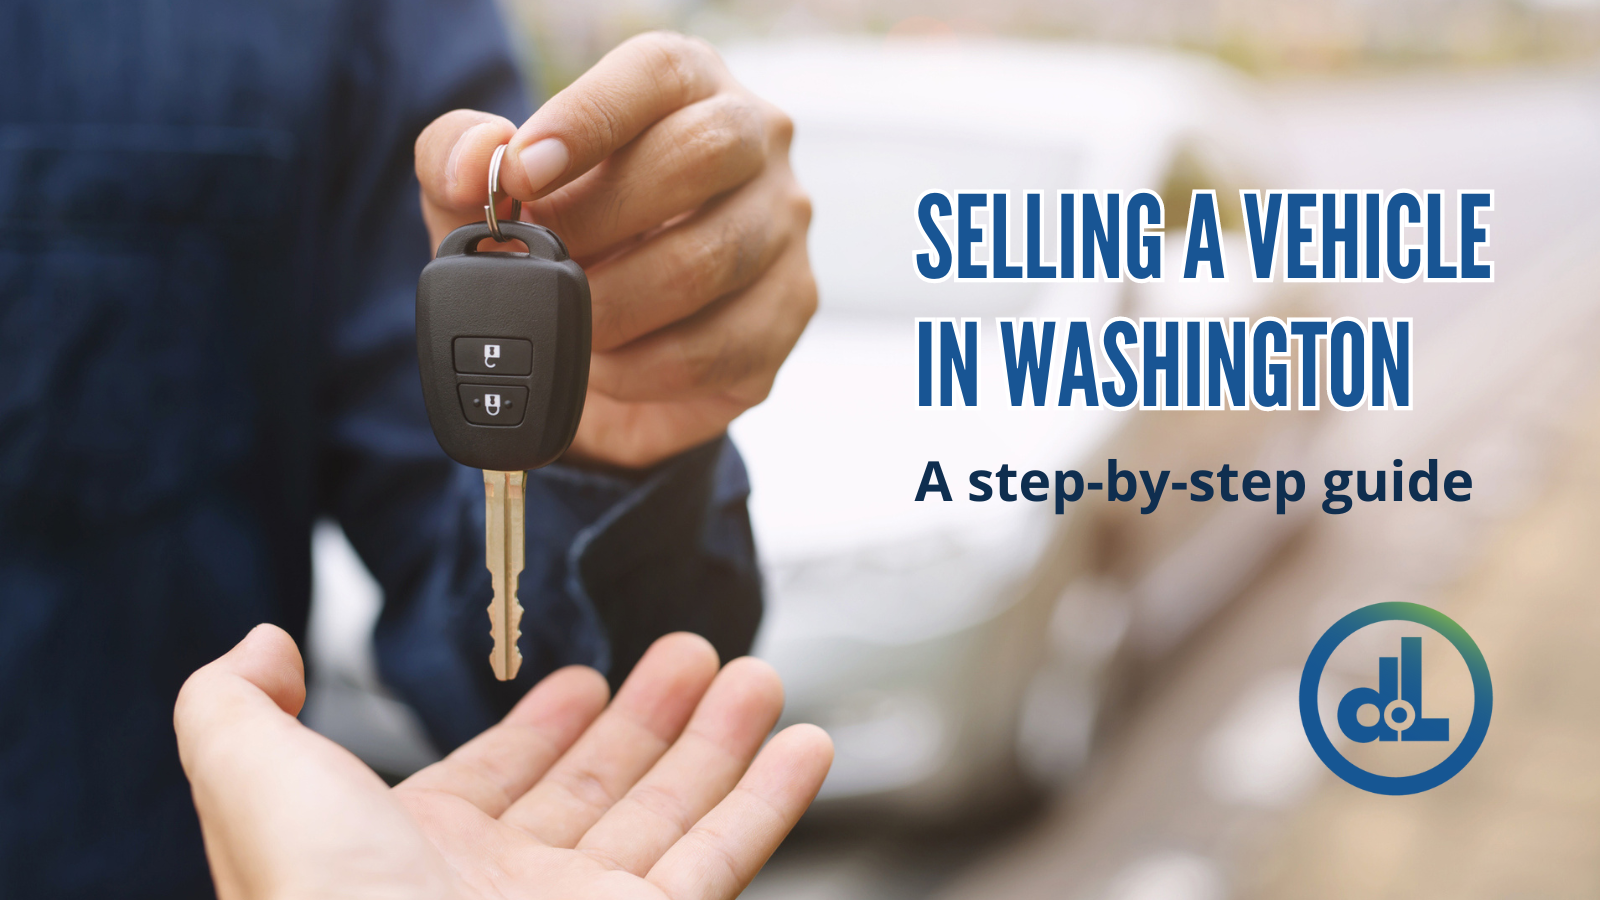 How to sell a vehicle in Washington state: A step-by-step guide